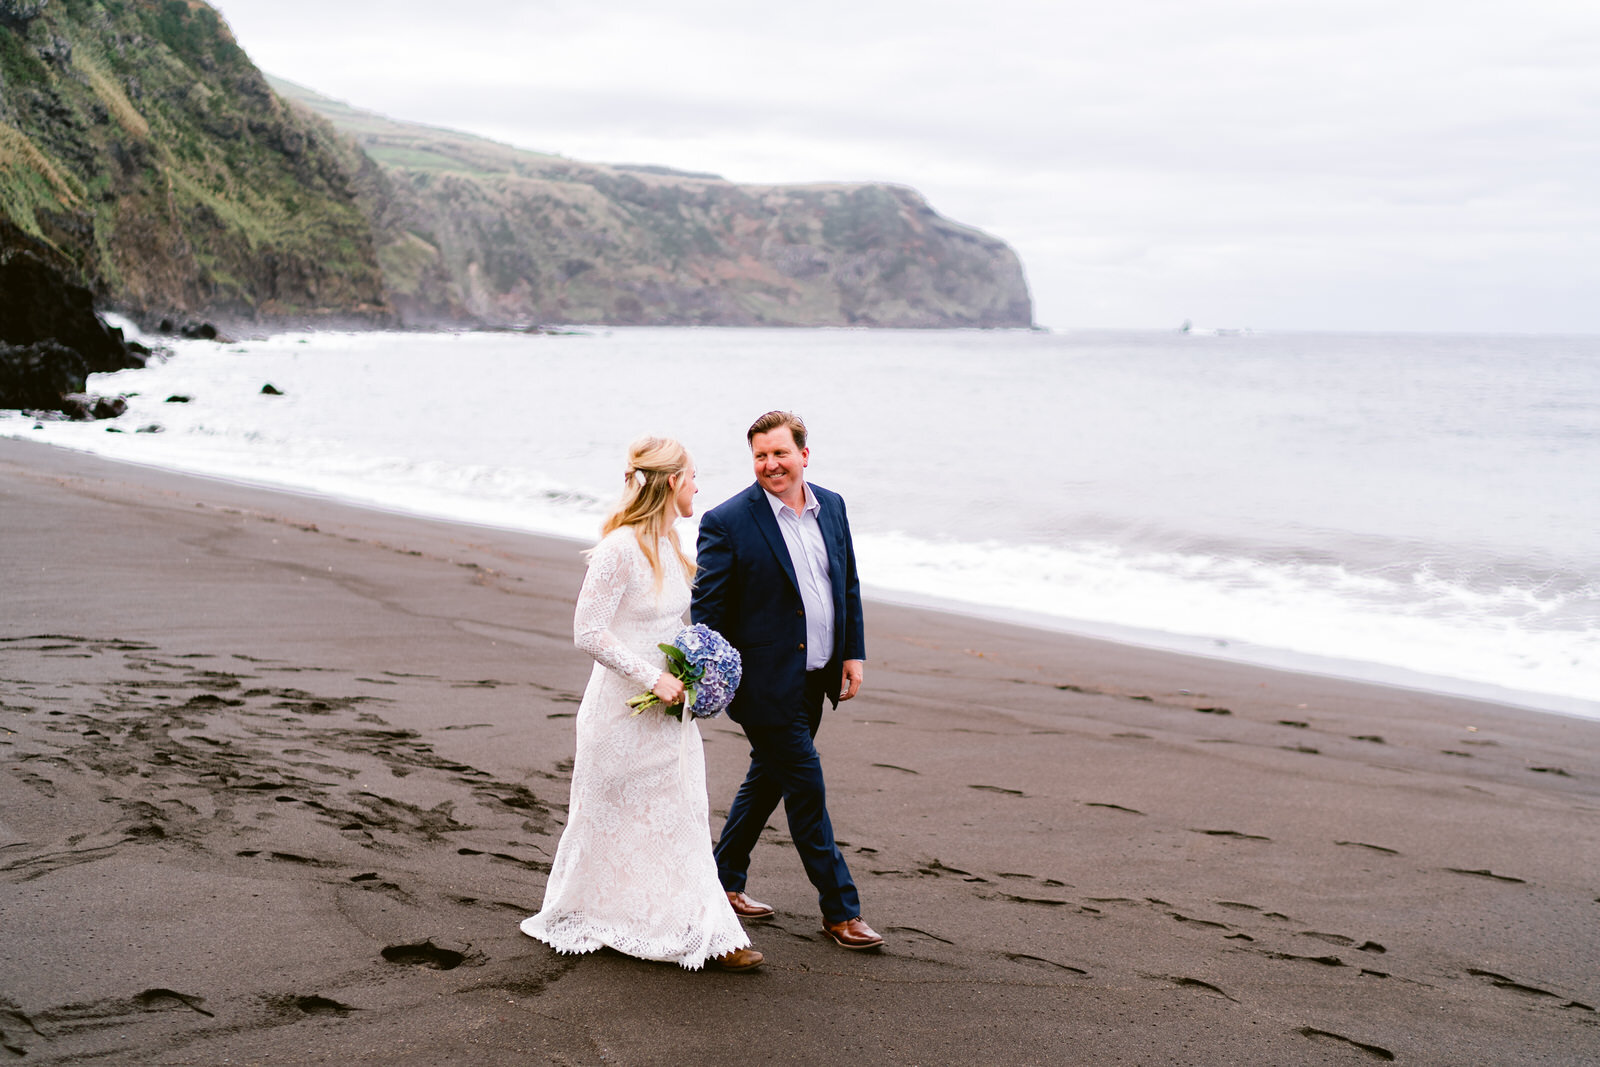 Elopement in the Azores. Cpuple getting married in Portugal. Elopement photography in Europe. Epic locations to elope in the world. Sao Miquel island Azores wedding (24).jpg